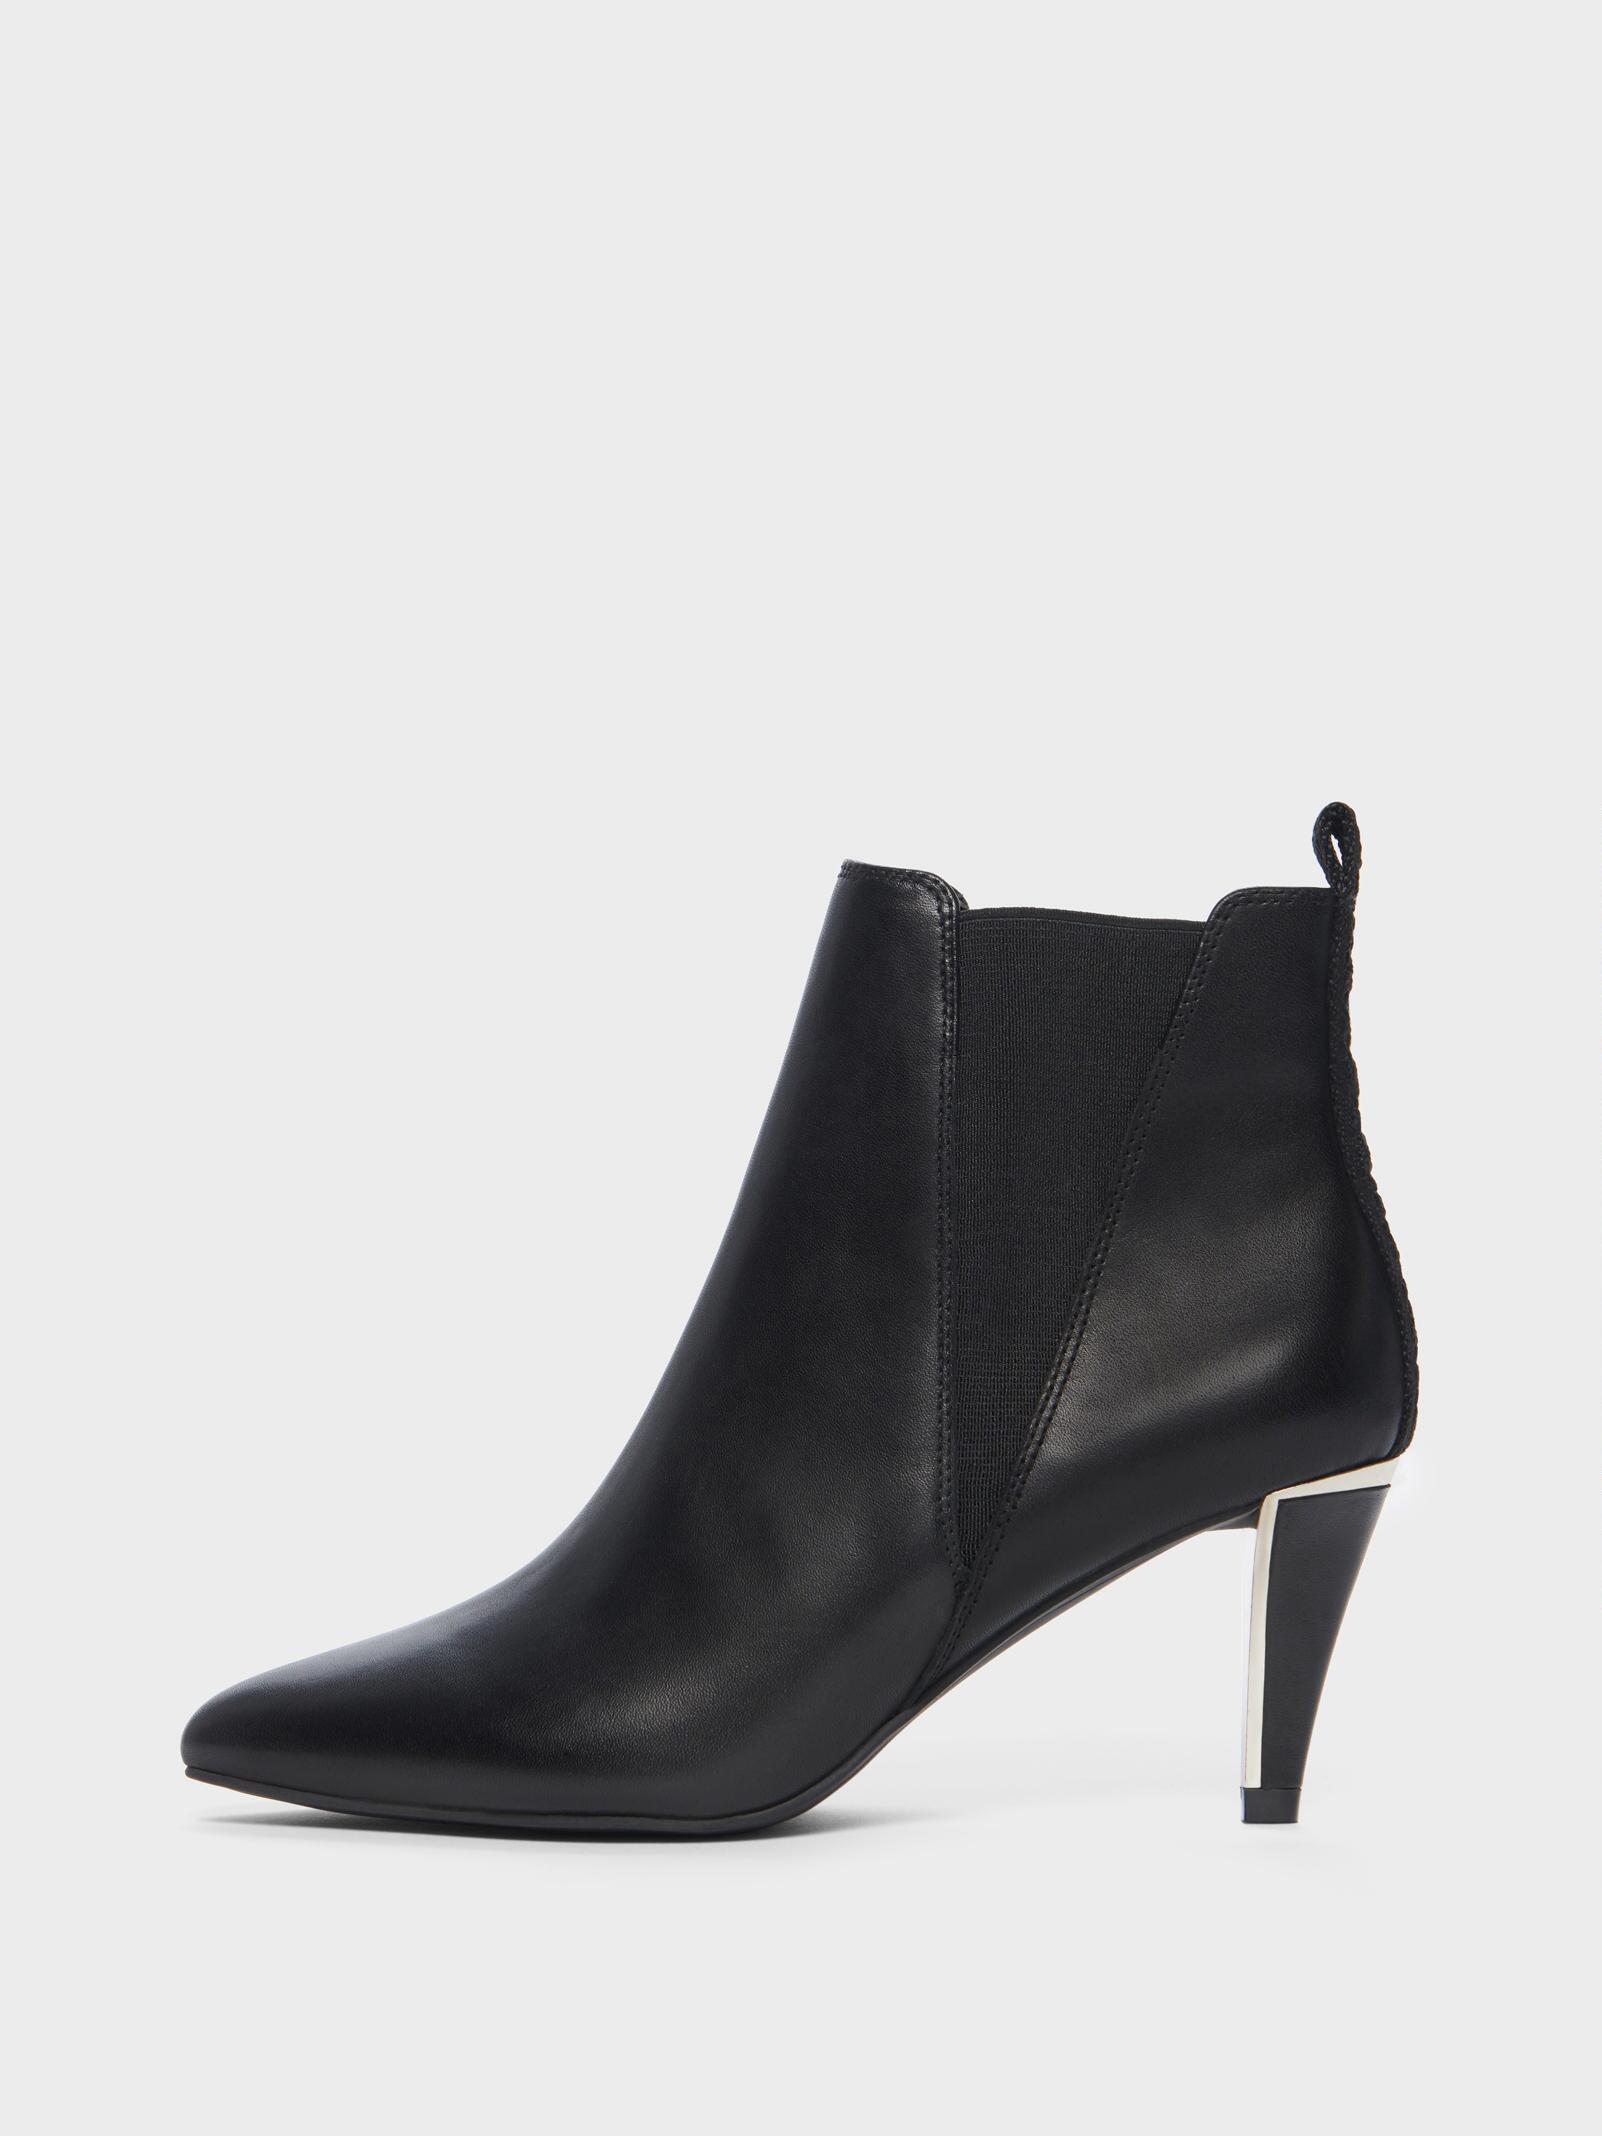 DKNY Womens Alani Suede Closed Toe Ankle Fashion Boots, Black Leather ...